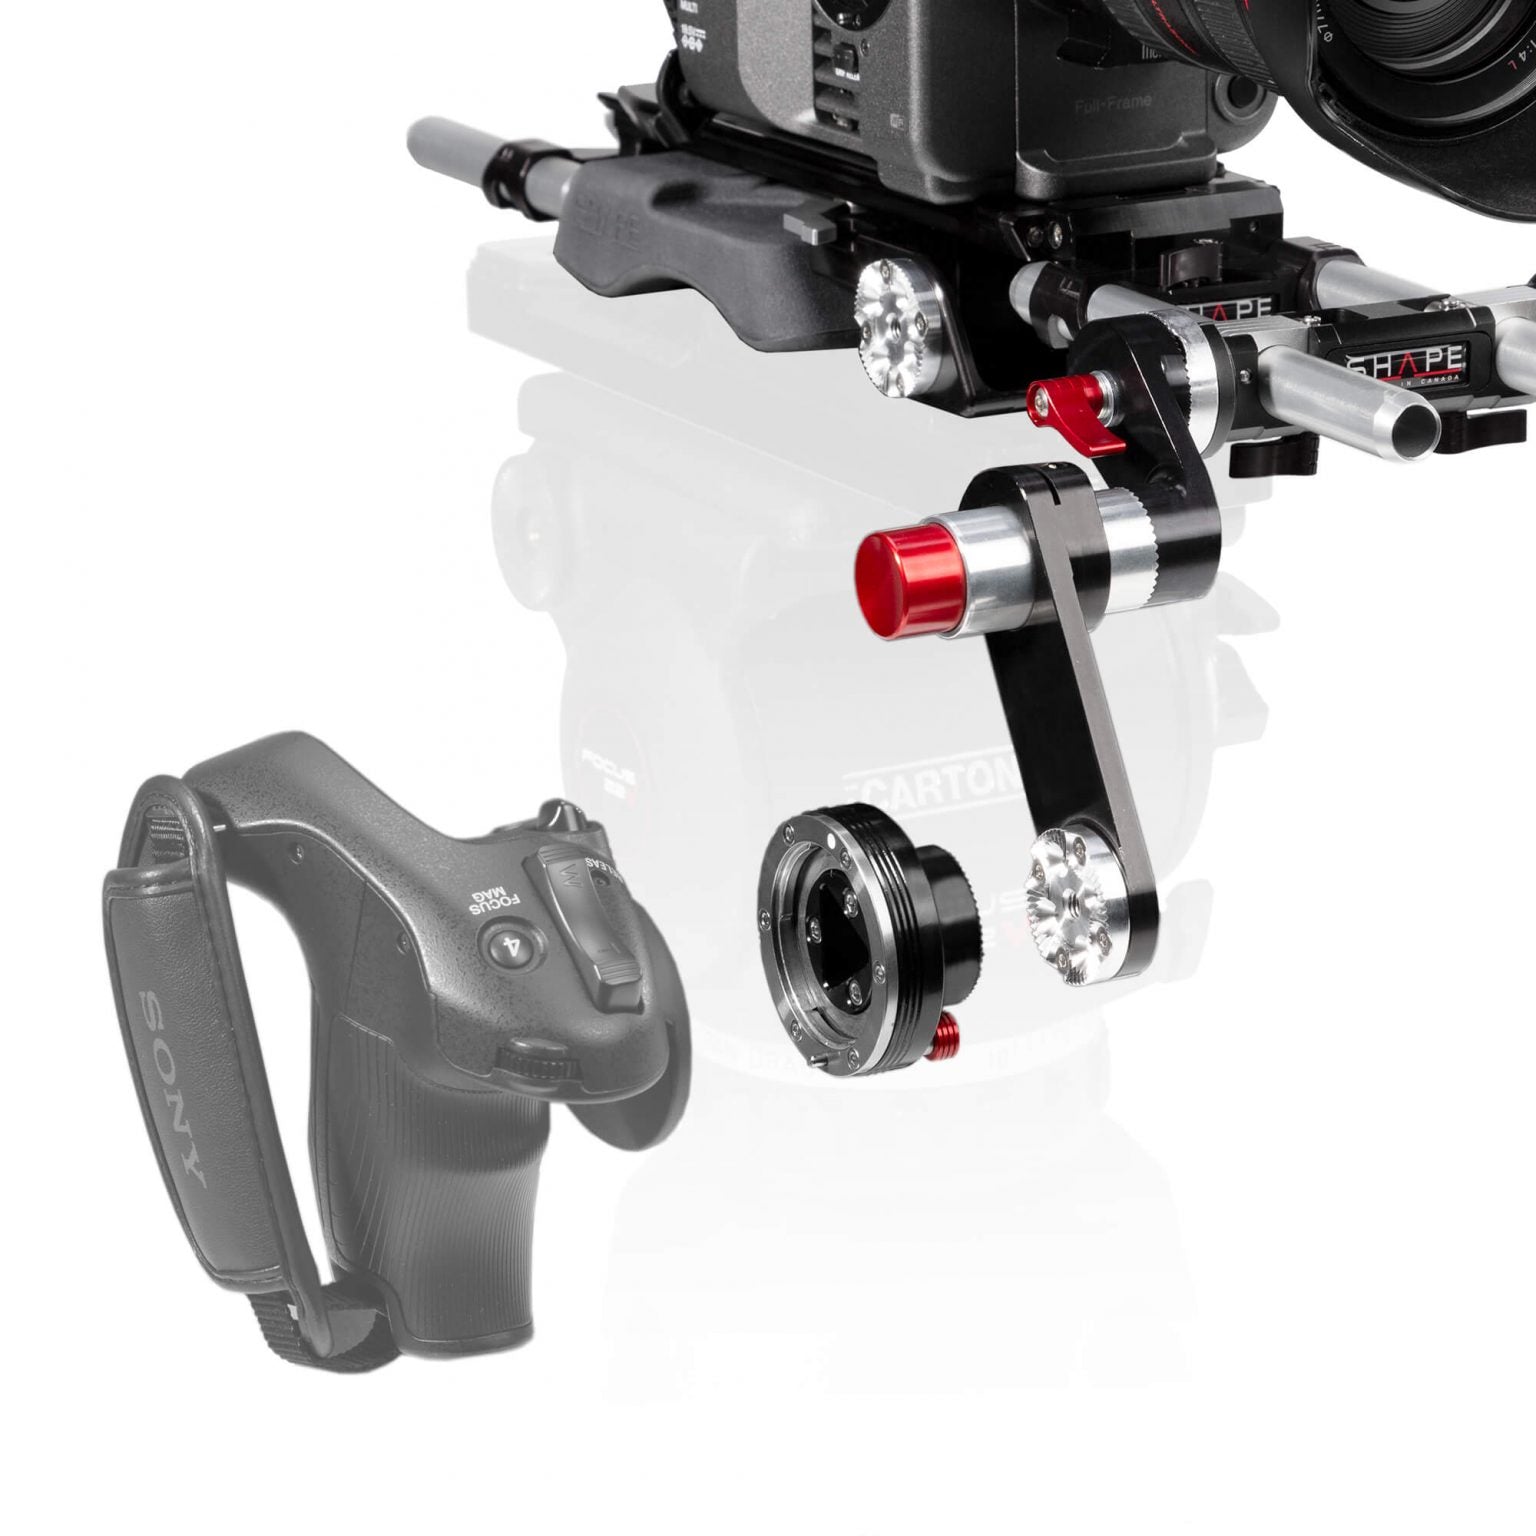 SHAPE Side Handle Adaptor for Sony FX6